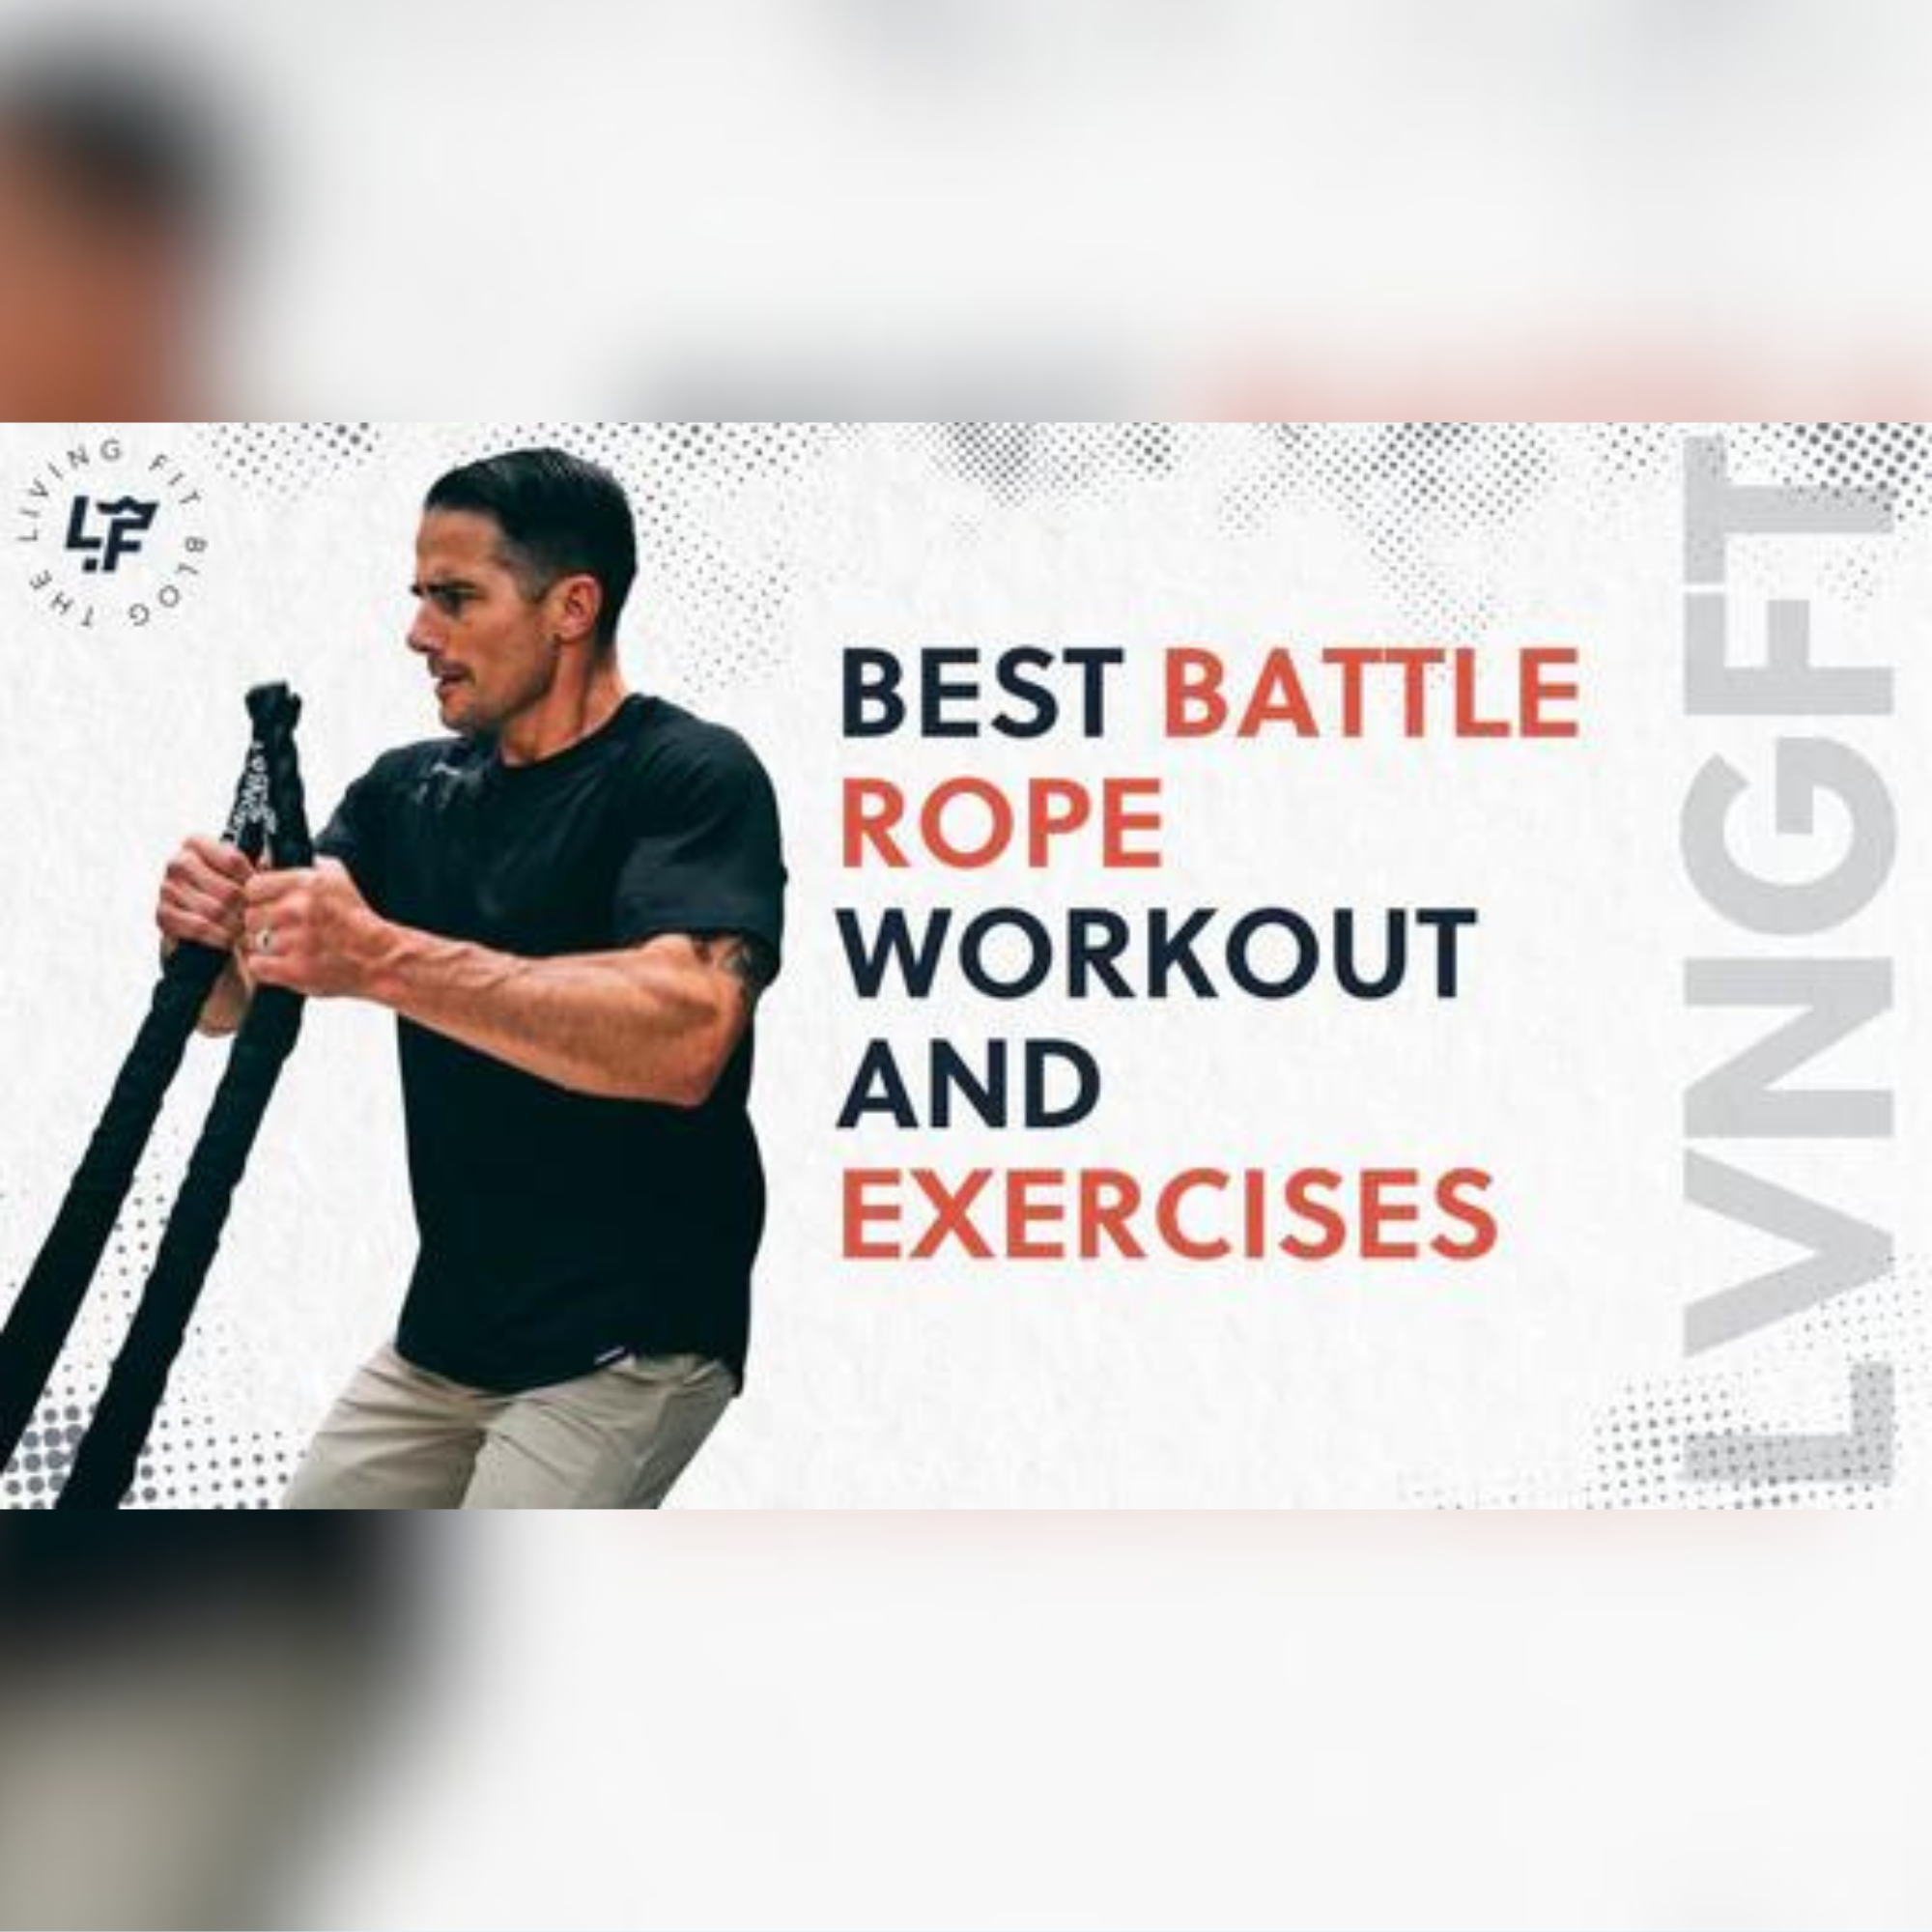 Sleeve Battle Rope, REP Fitness